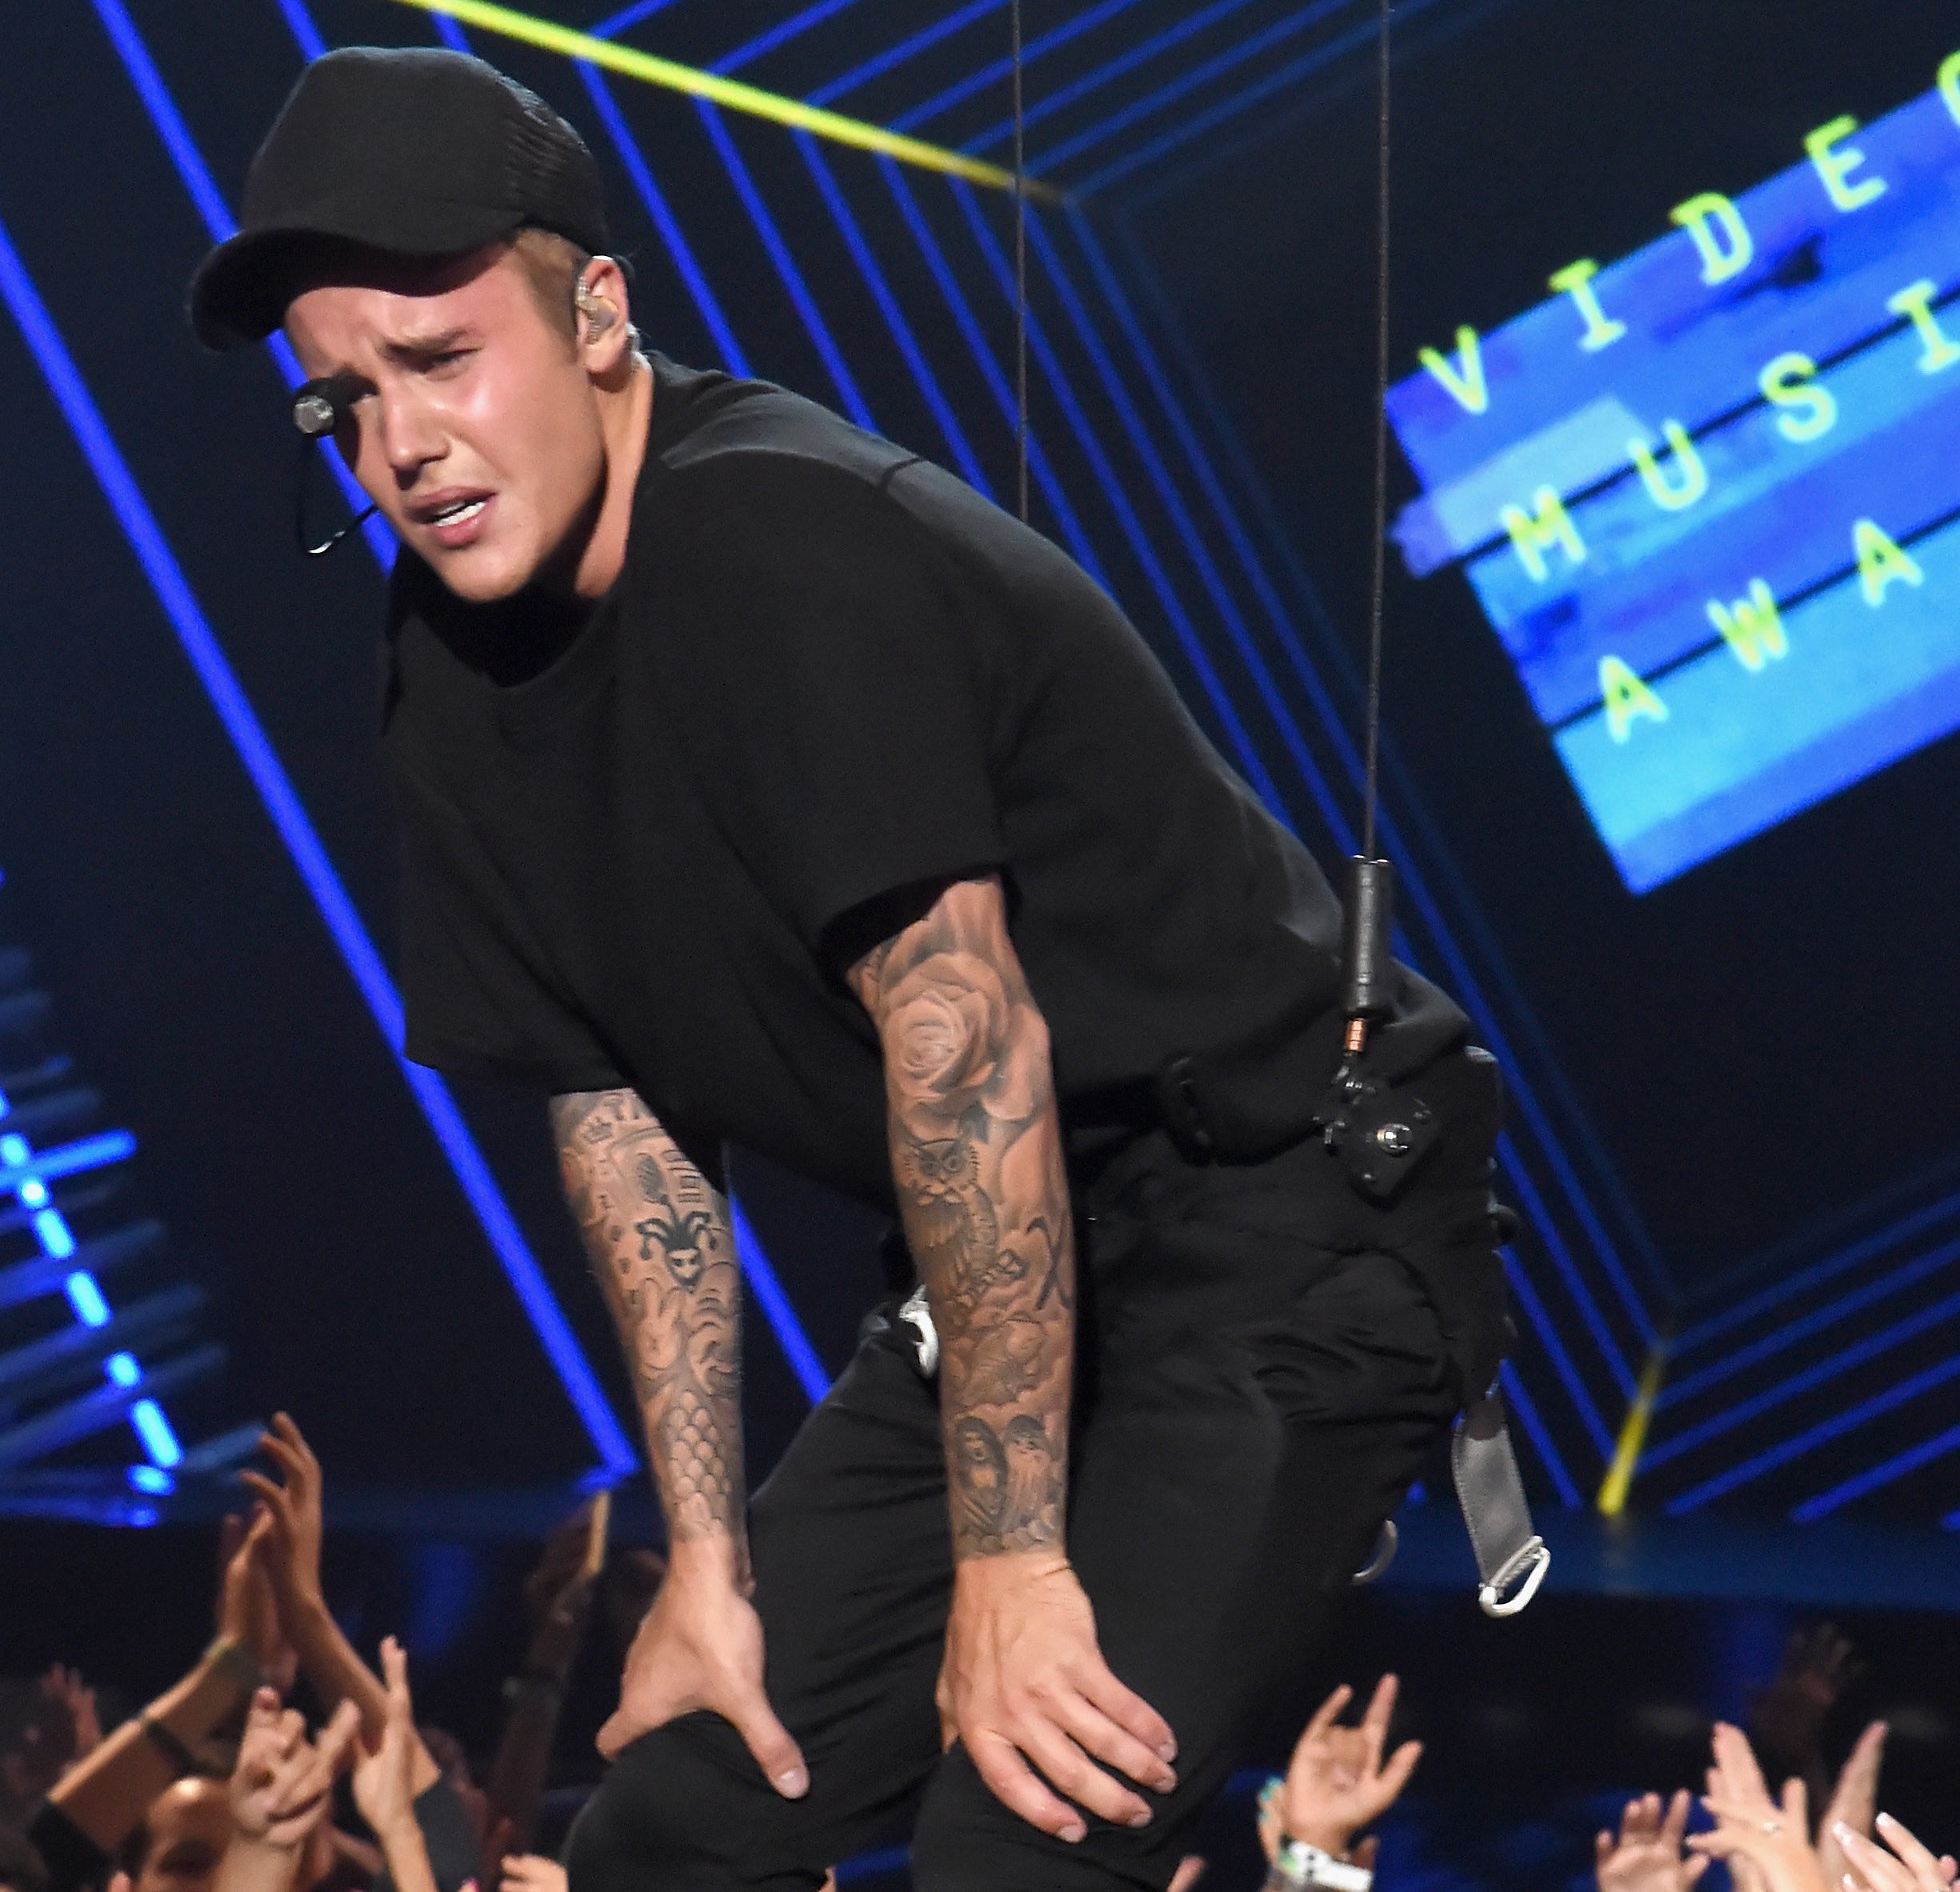 Justin Bieber gets emotional during his performance onstage during the 2015 MTV Video Music Awards at Microsoft Theater on August 30, 2015 in Los Angeles, California.